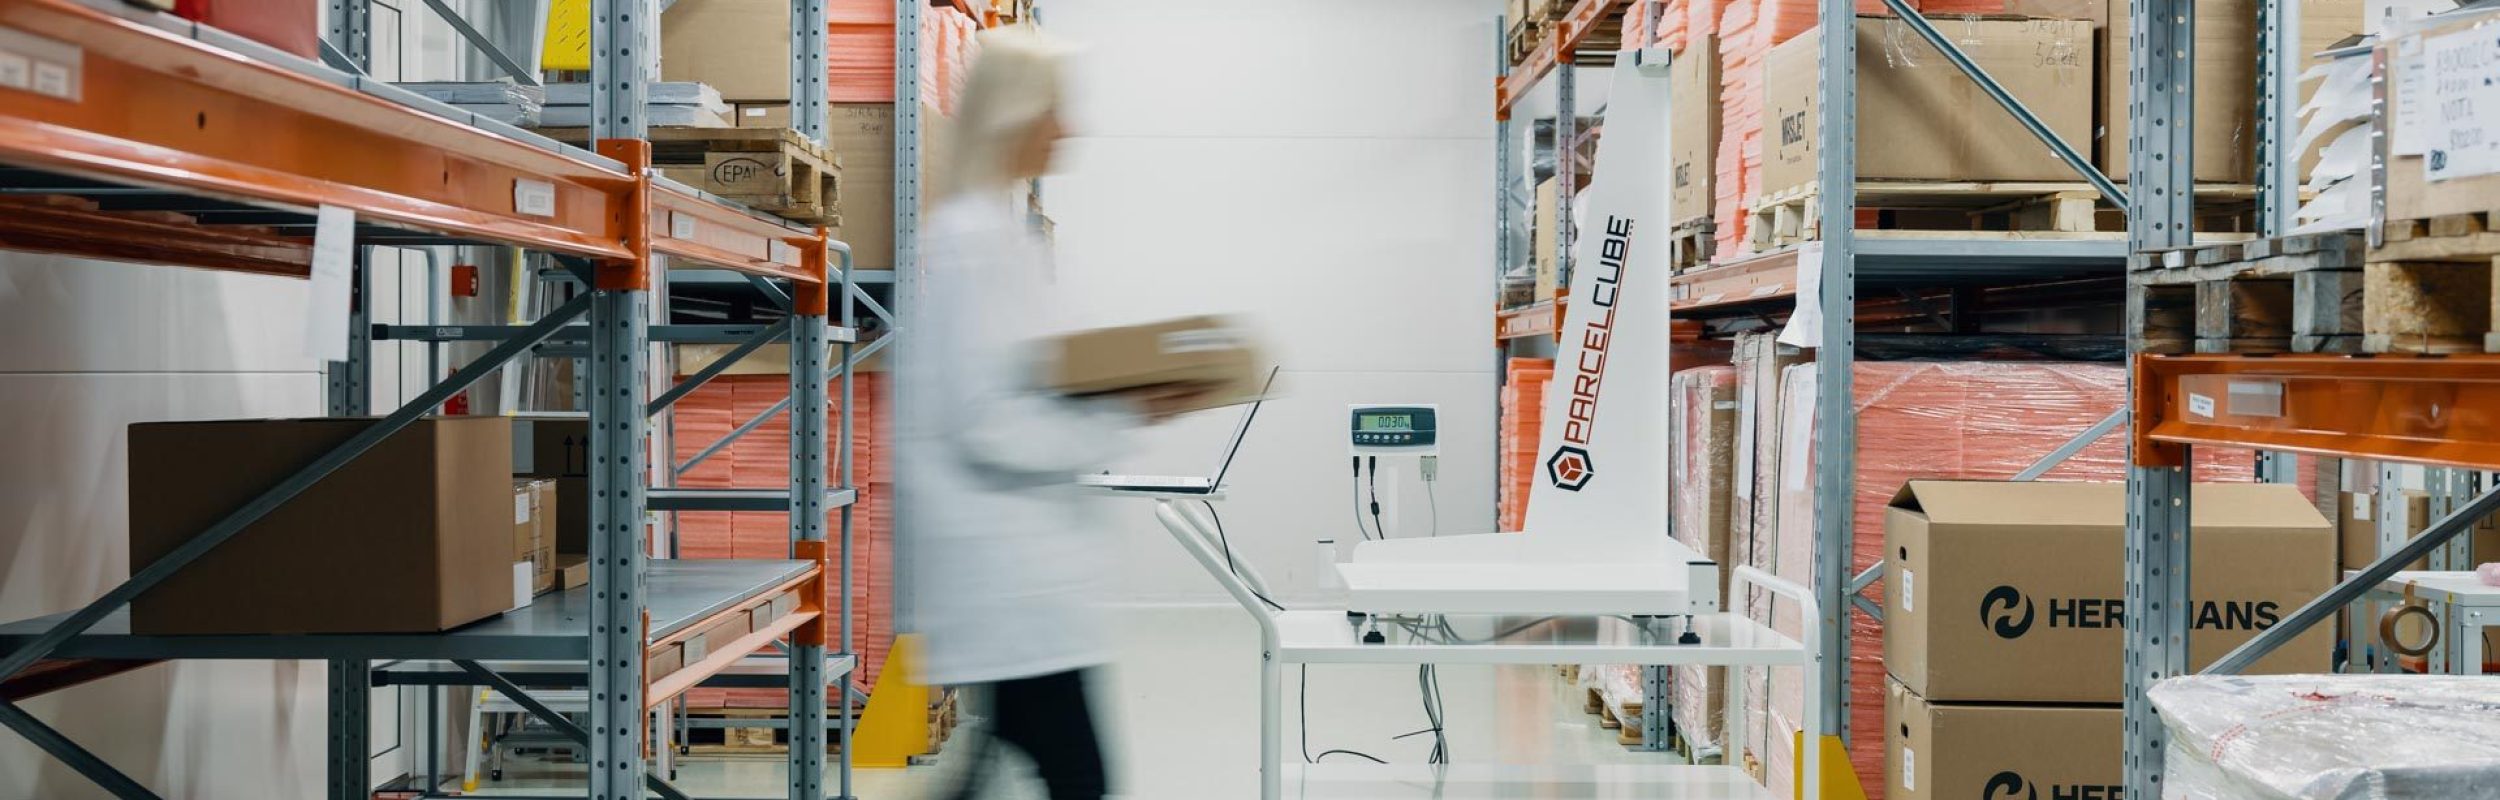 Parcelcube 900 collecting accurate master data by measuring and weighing items in a warehouse